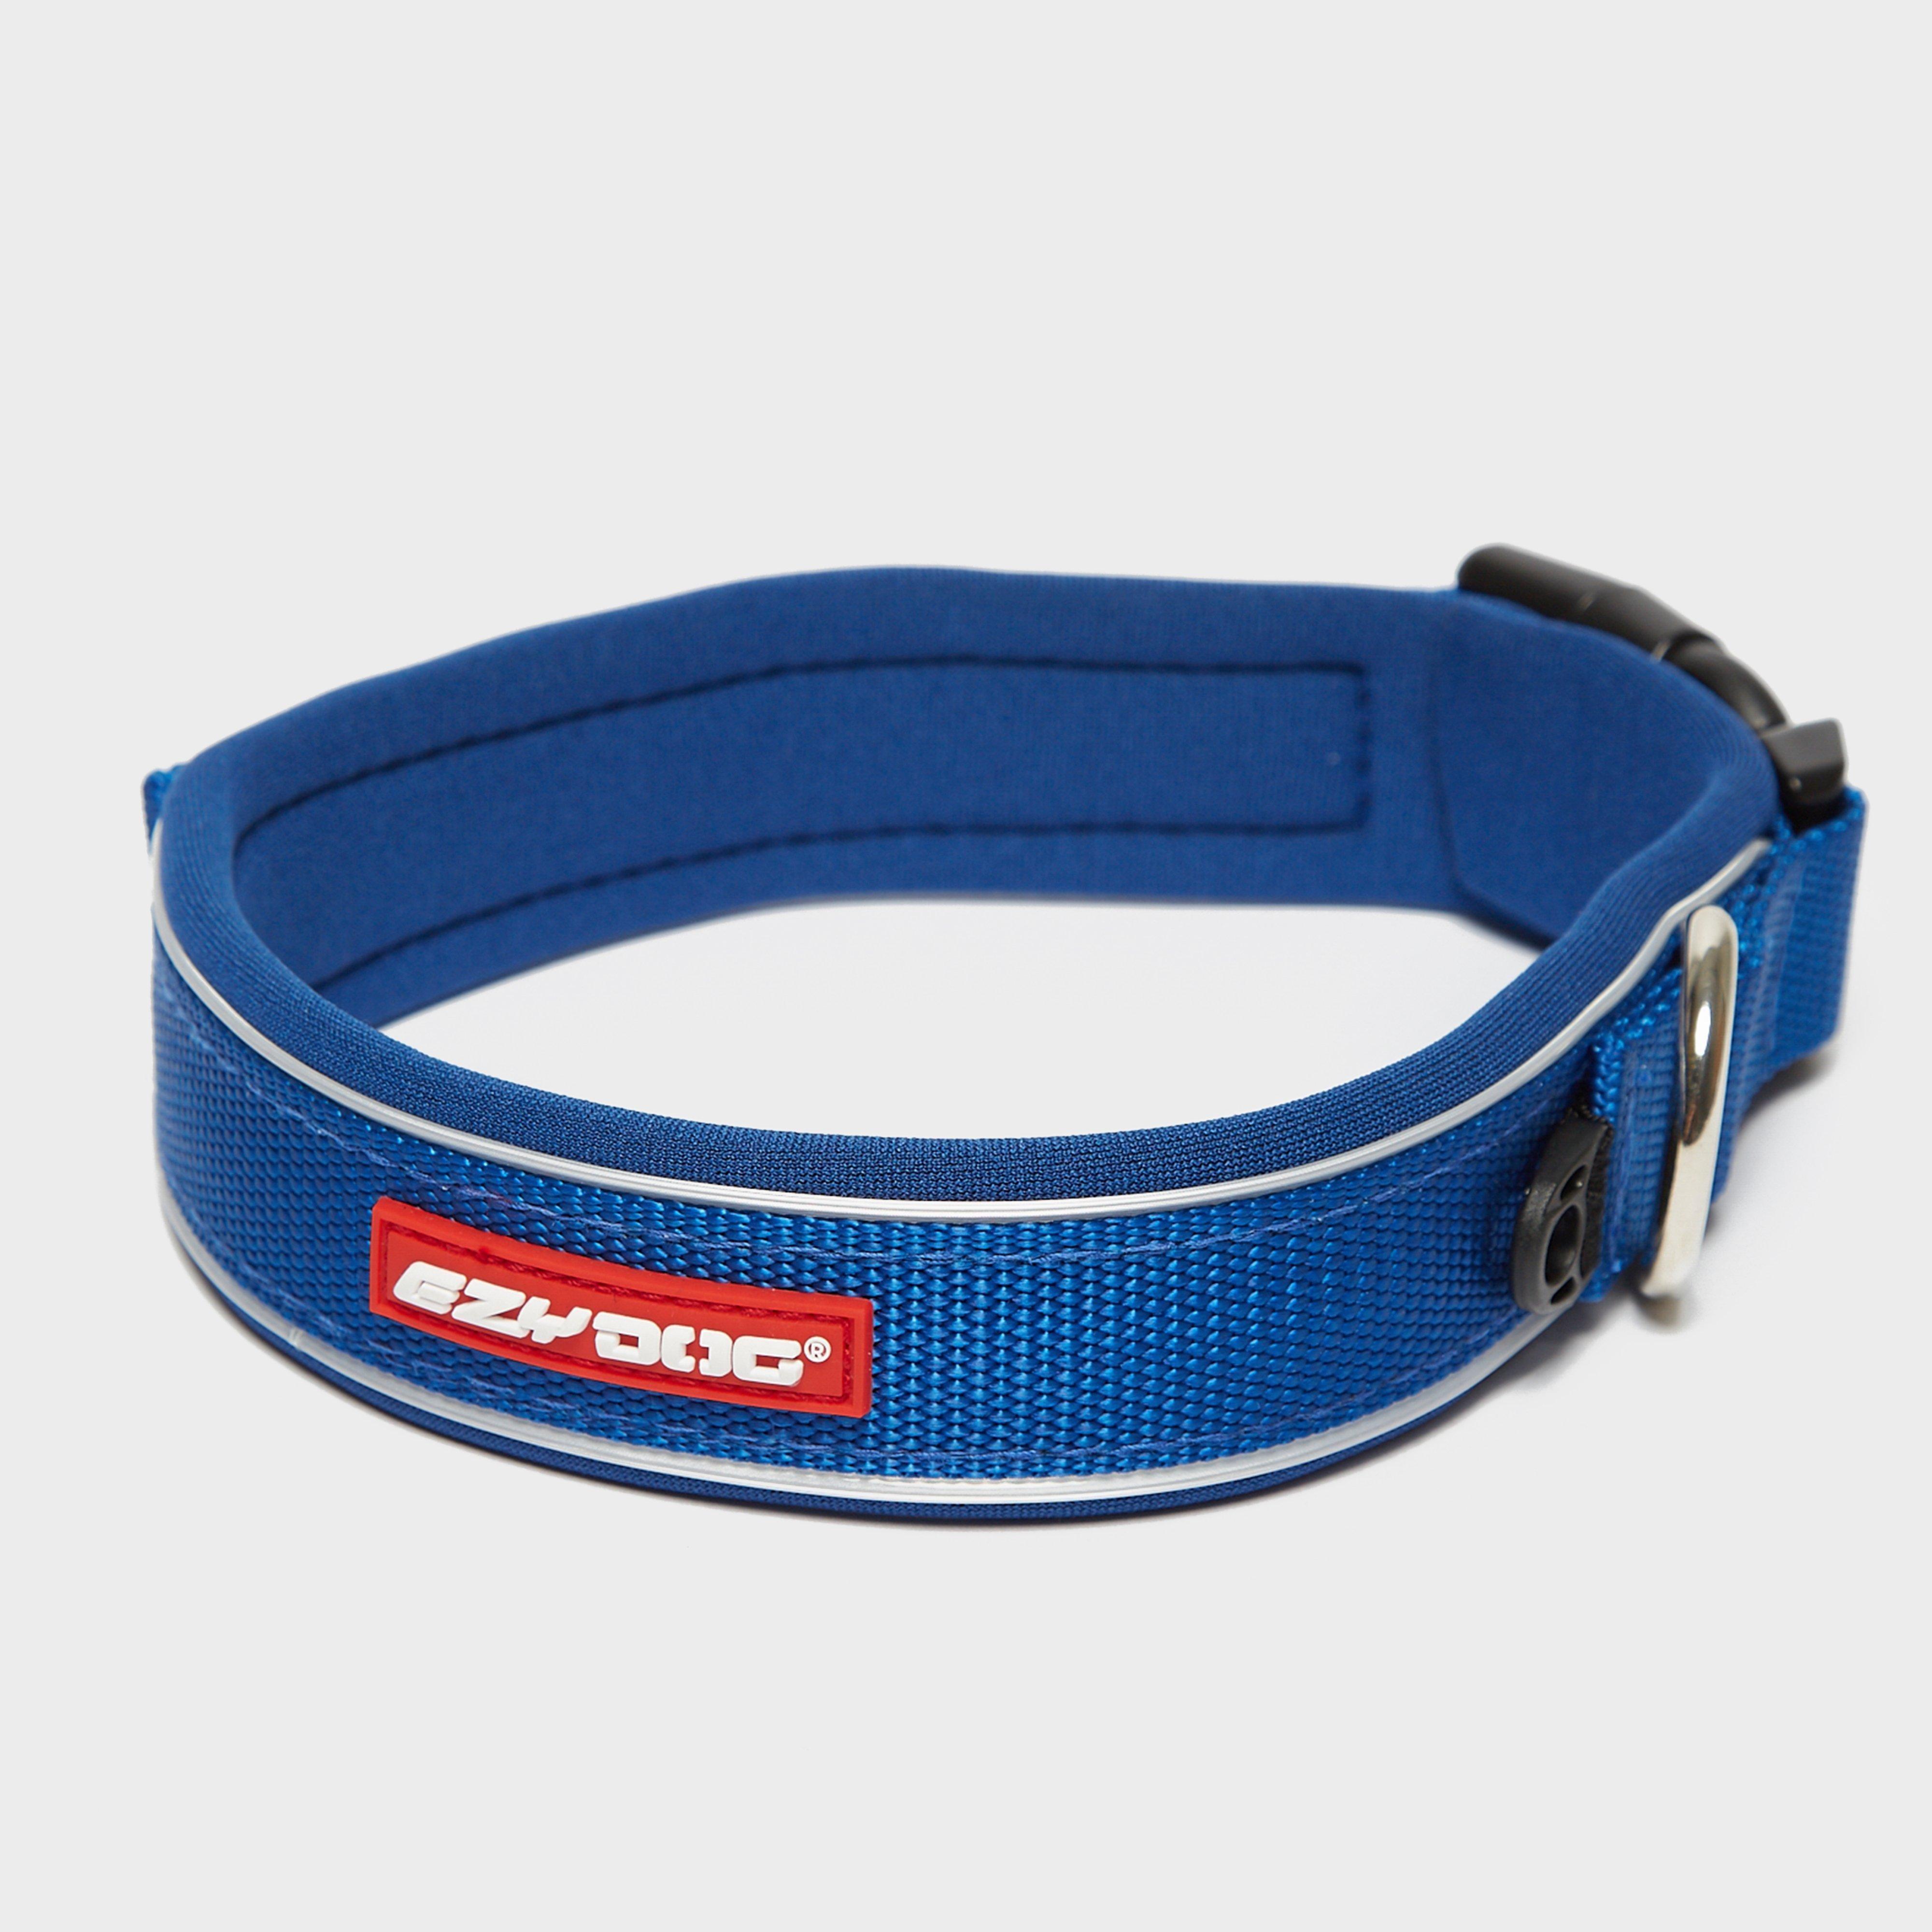 Ezy-Dog Neo Classic Collar (Large) Review